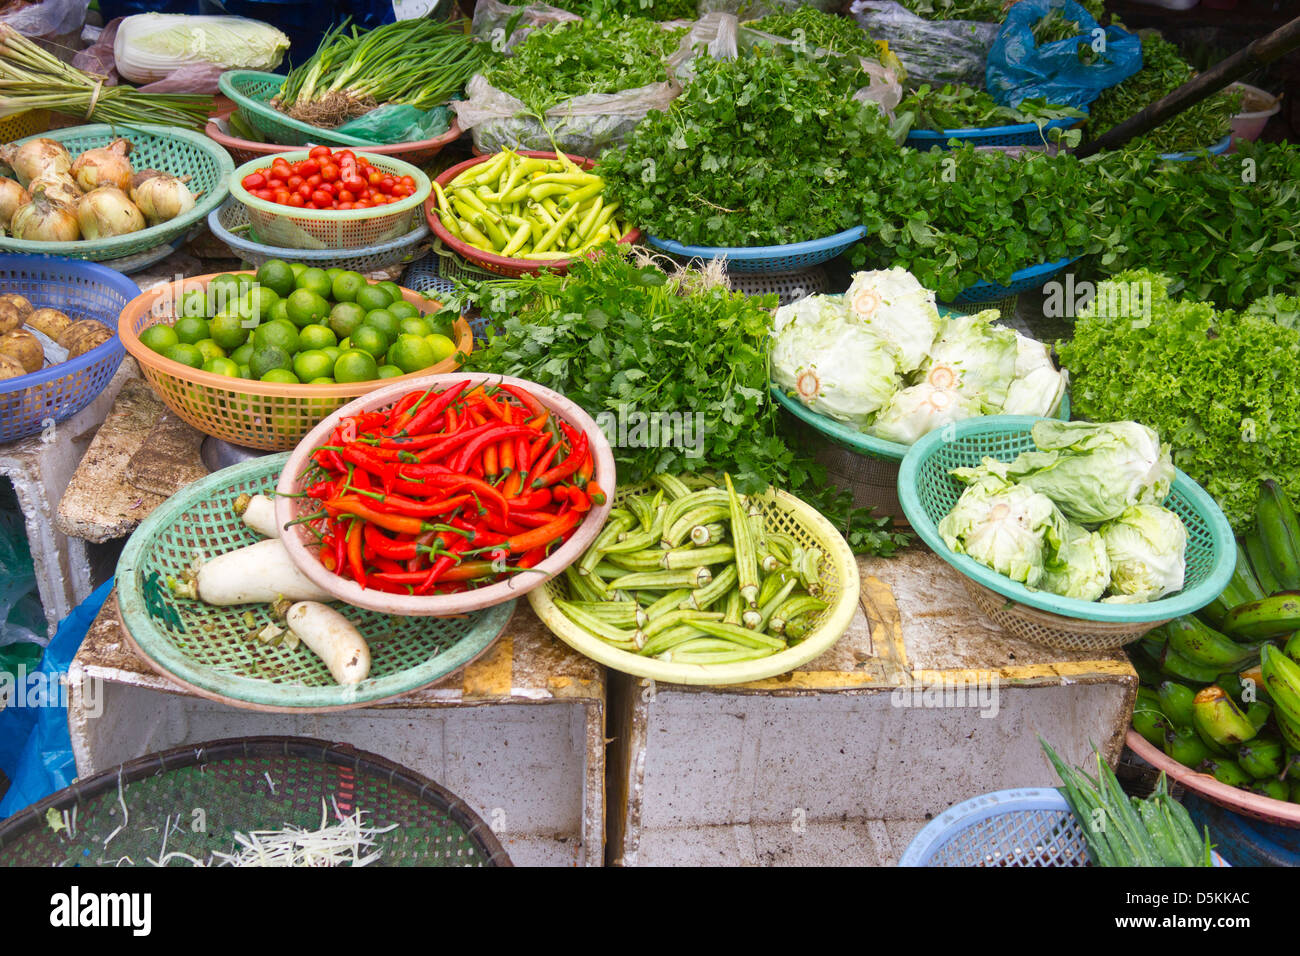 Hue a former imperial capital city Vietnam a historic landmark Food stalls are common  street food freshly prepared cooked Stock Photo